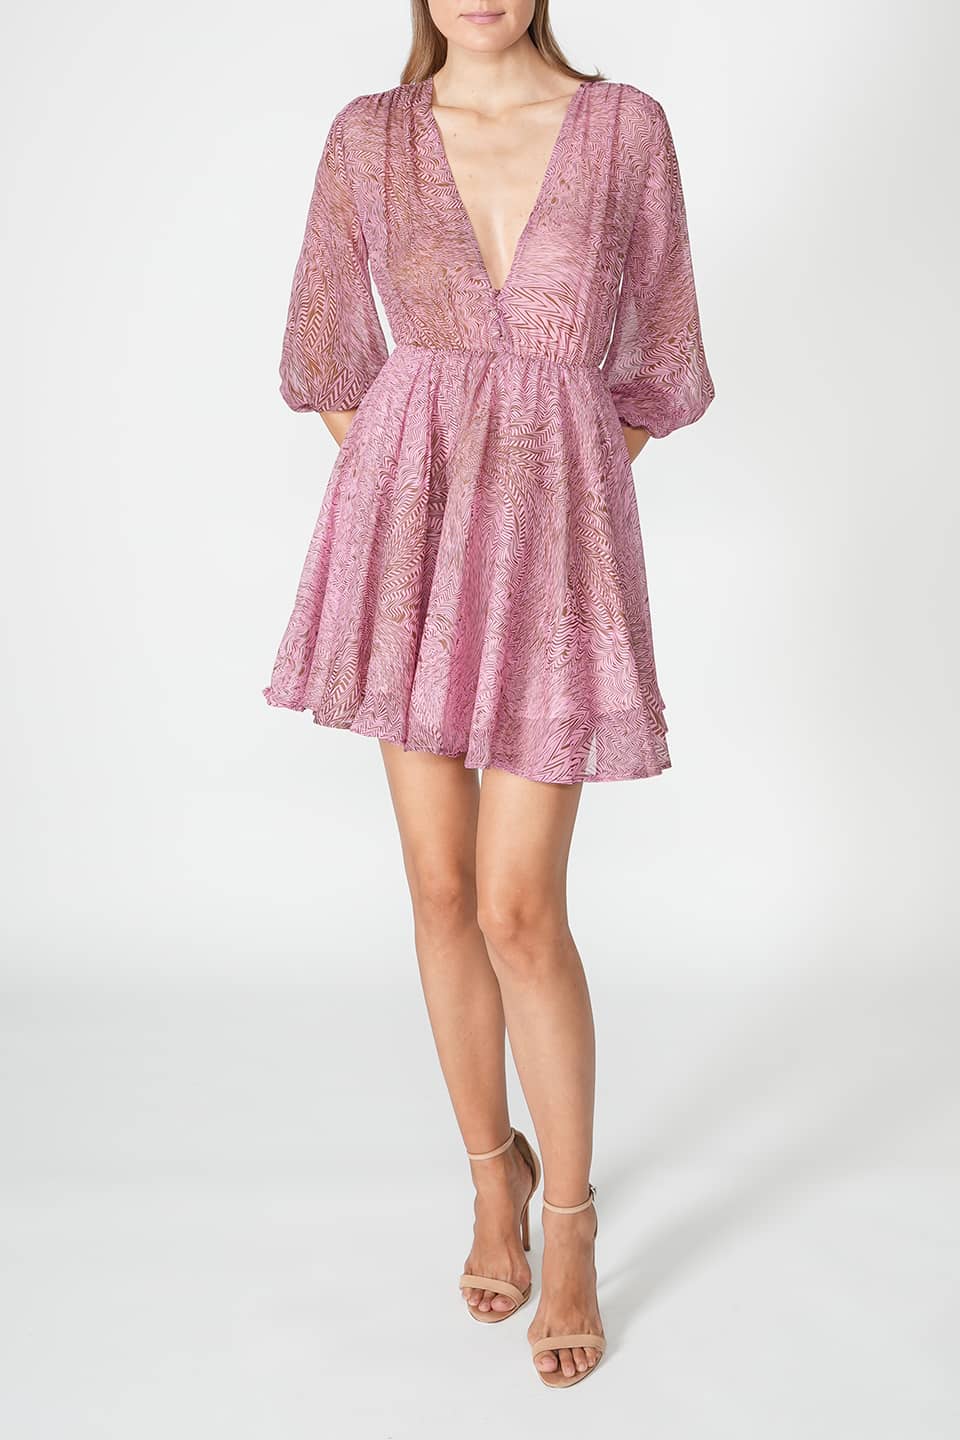 Designer Pink Mini dresses, shop online with free delivery in UAE. Product gallery 2